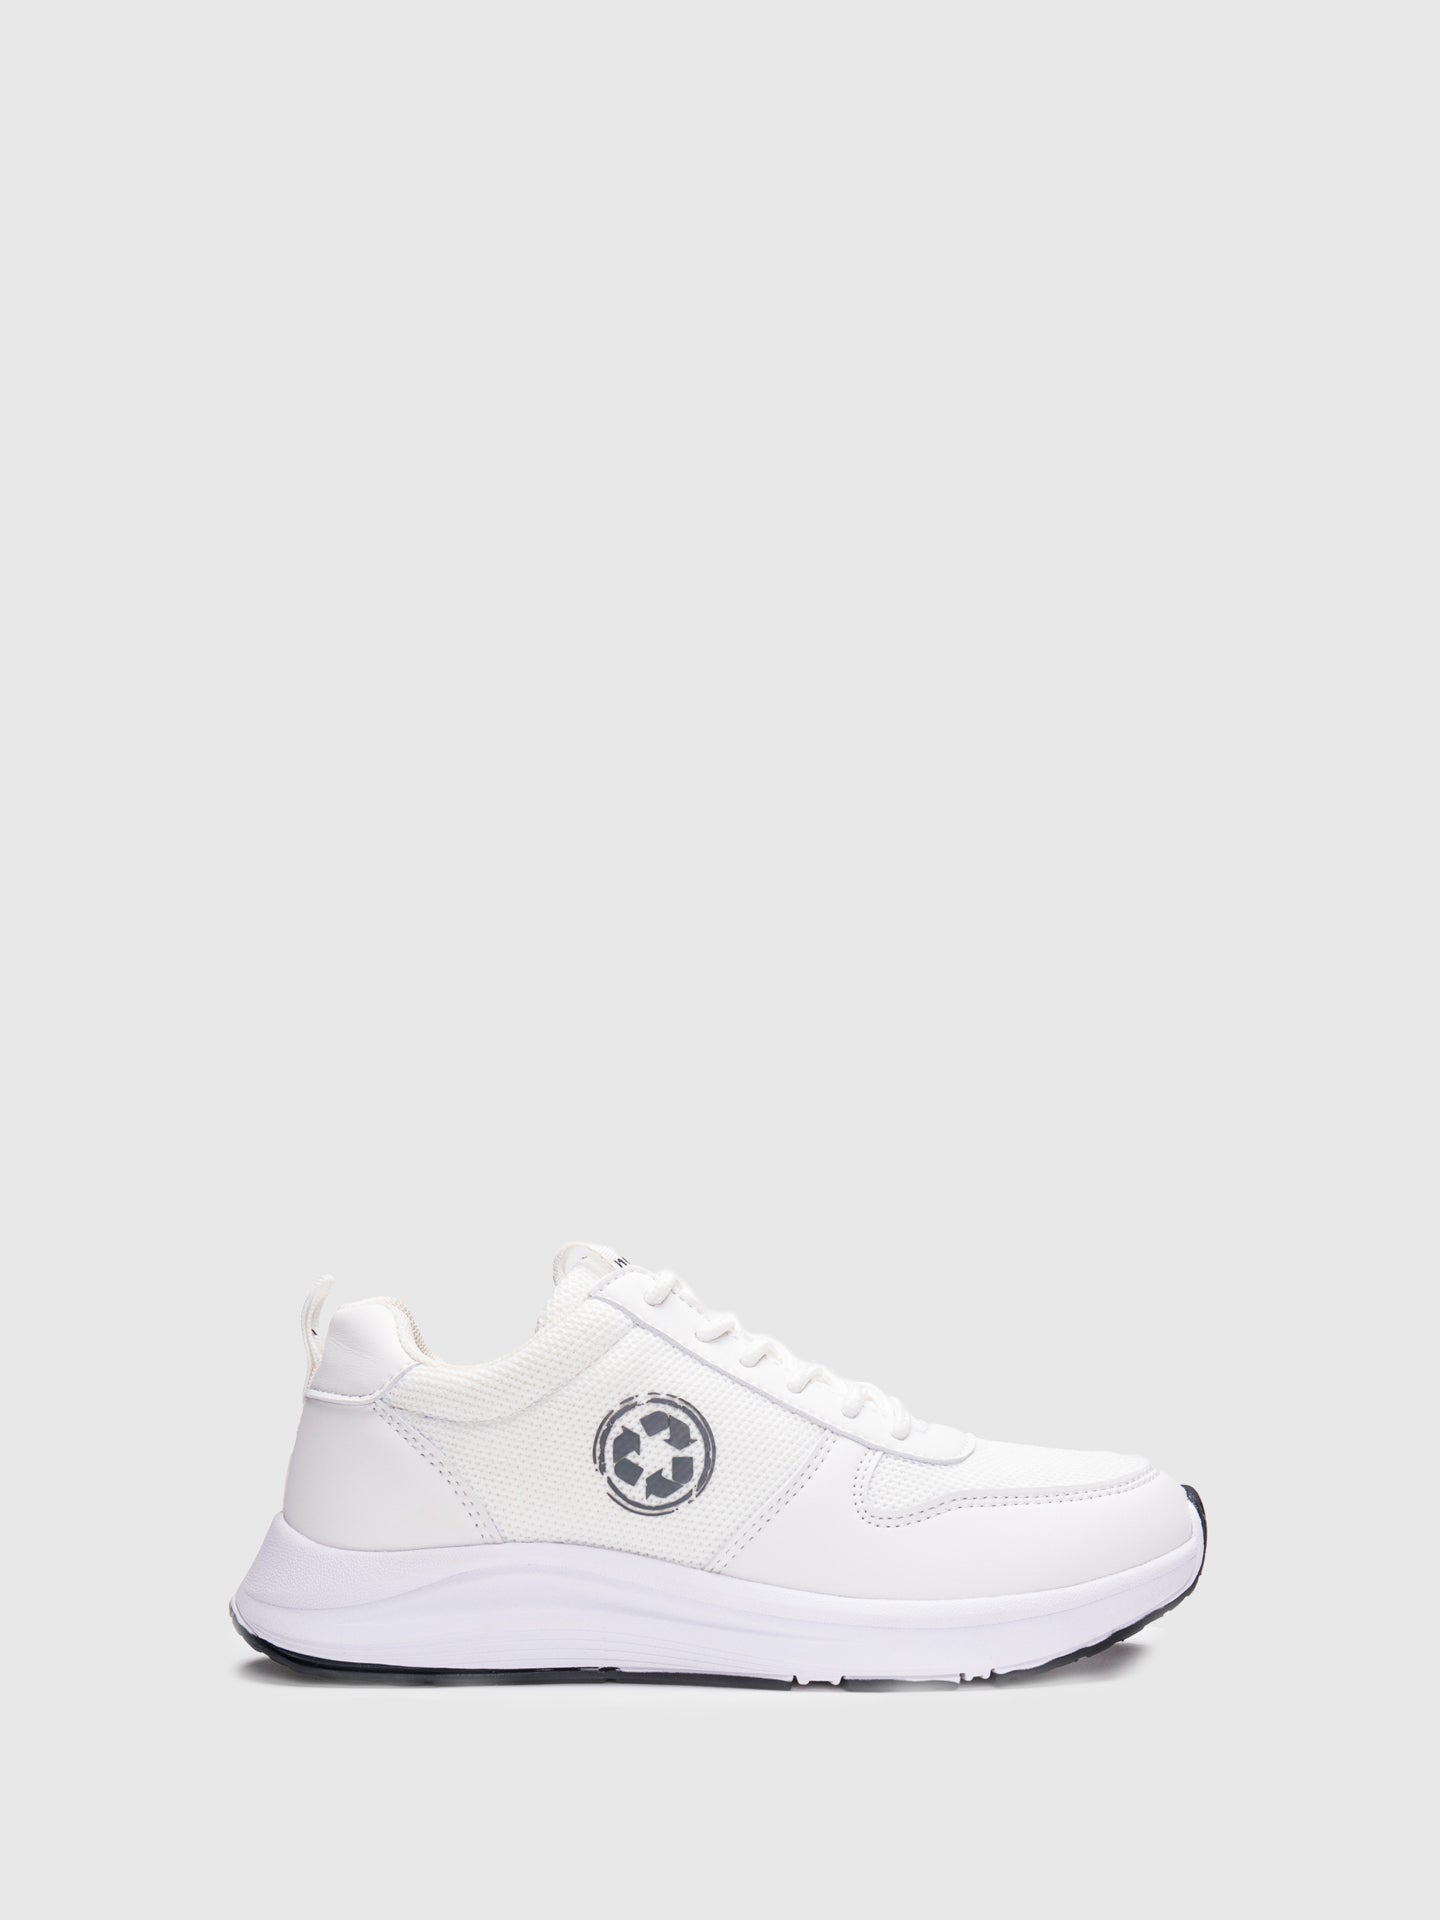 NAE Vegan Shoes White Lace-up Trainers